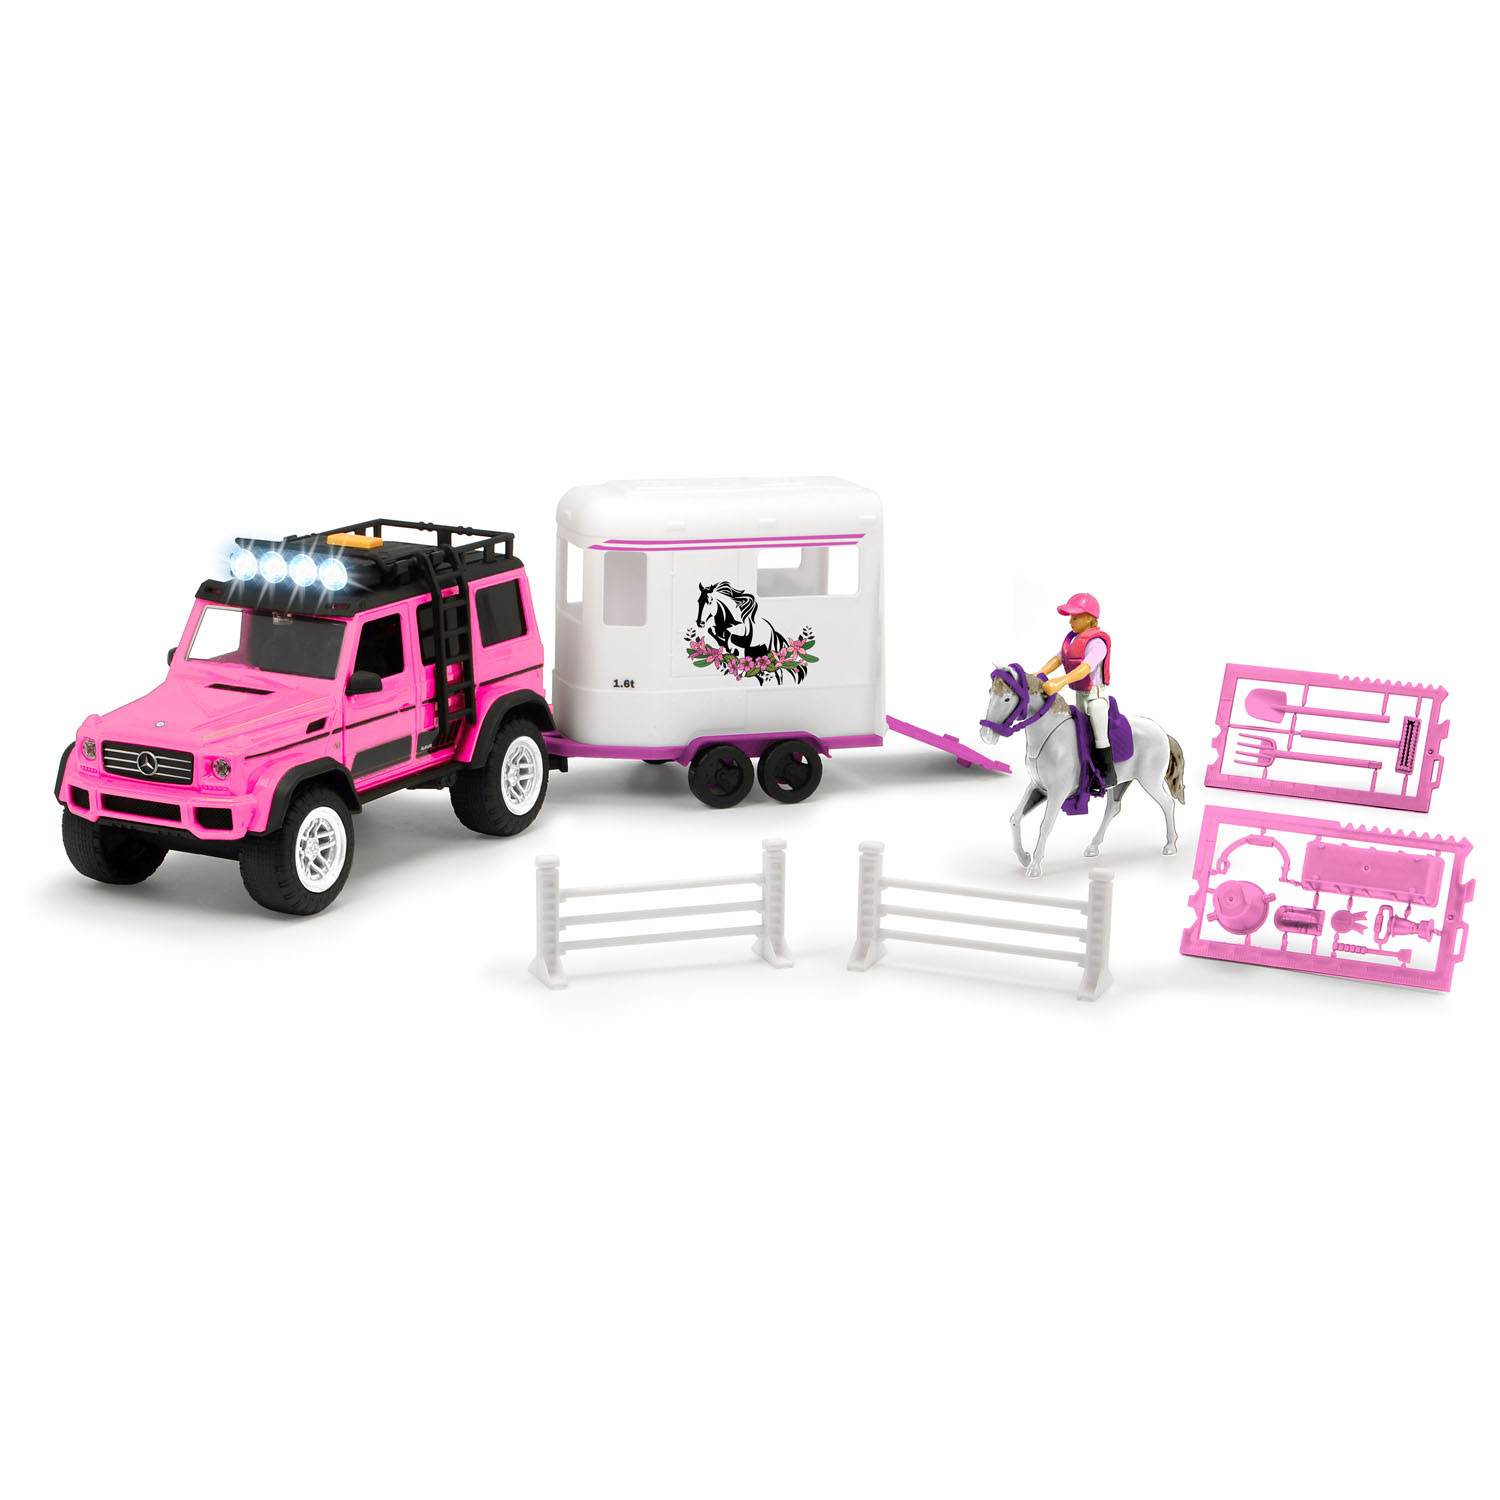 Bezit Norm Haas Dickie Playlife - Horse trailer Pink | Thimble Toys